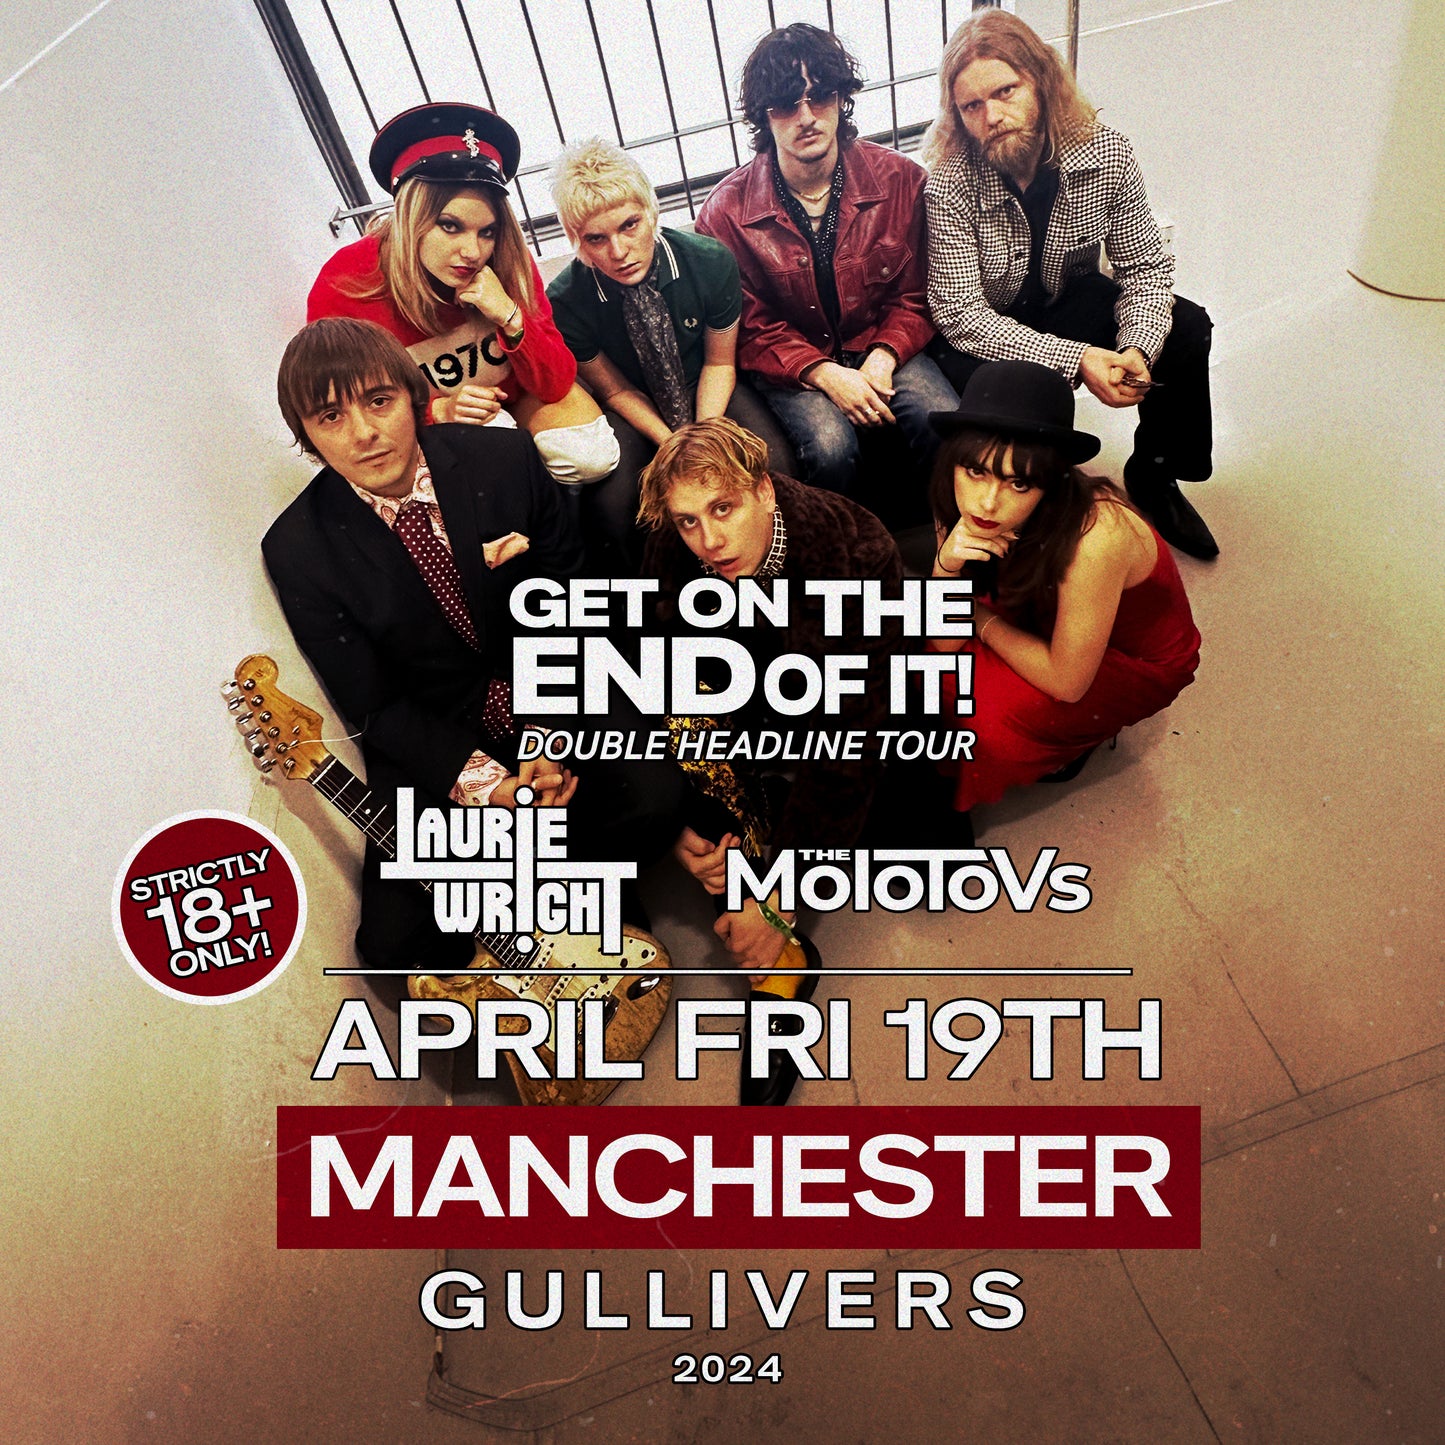 MANCHESTER | GULLIVERS | 19.04.24 | Get On The End Of It: Double Headline Tour